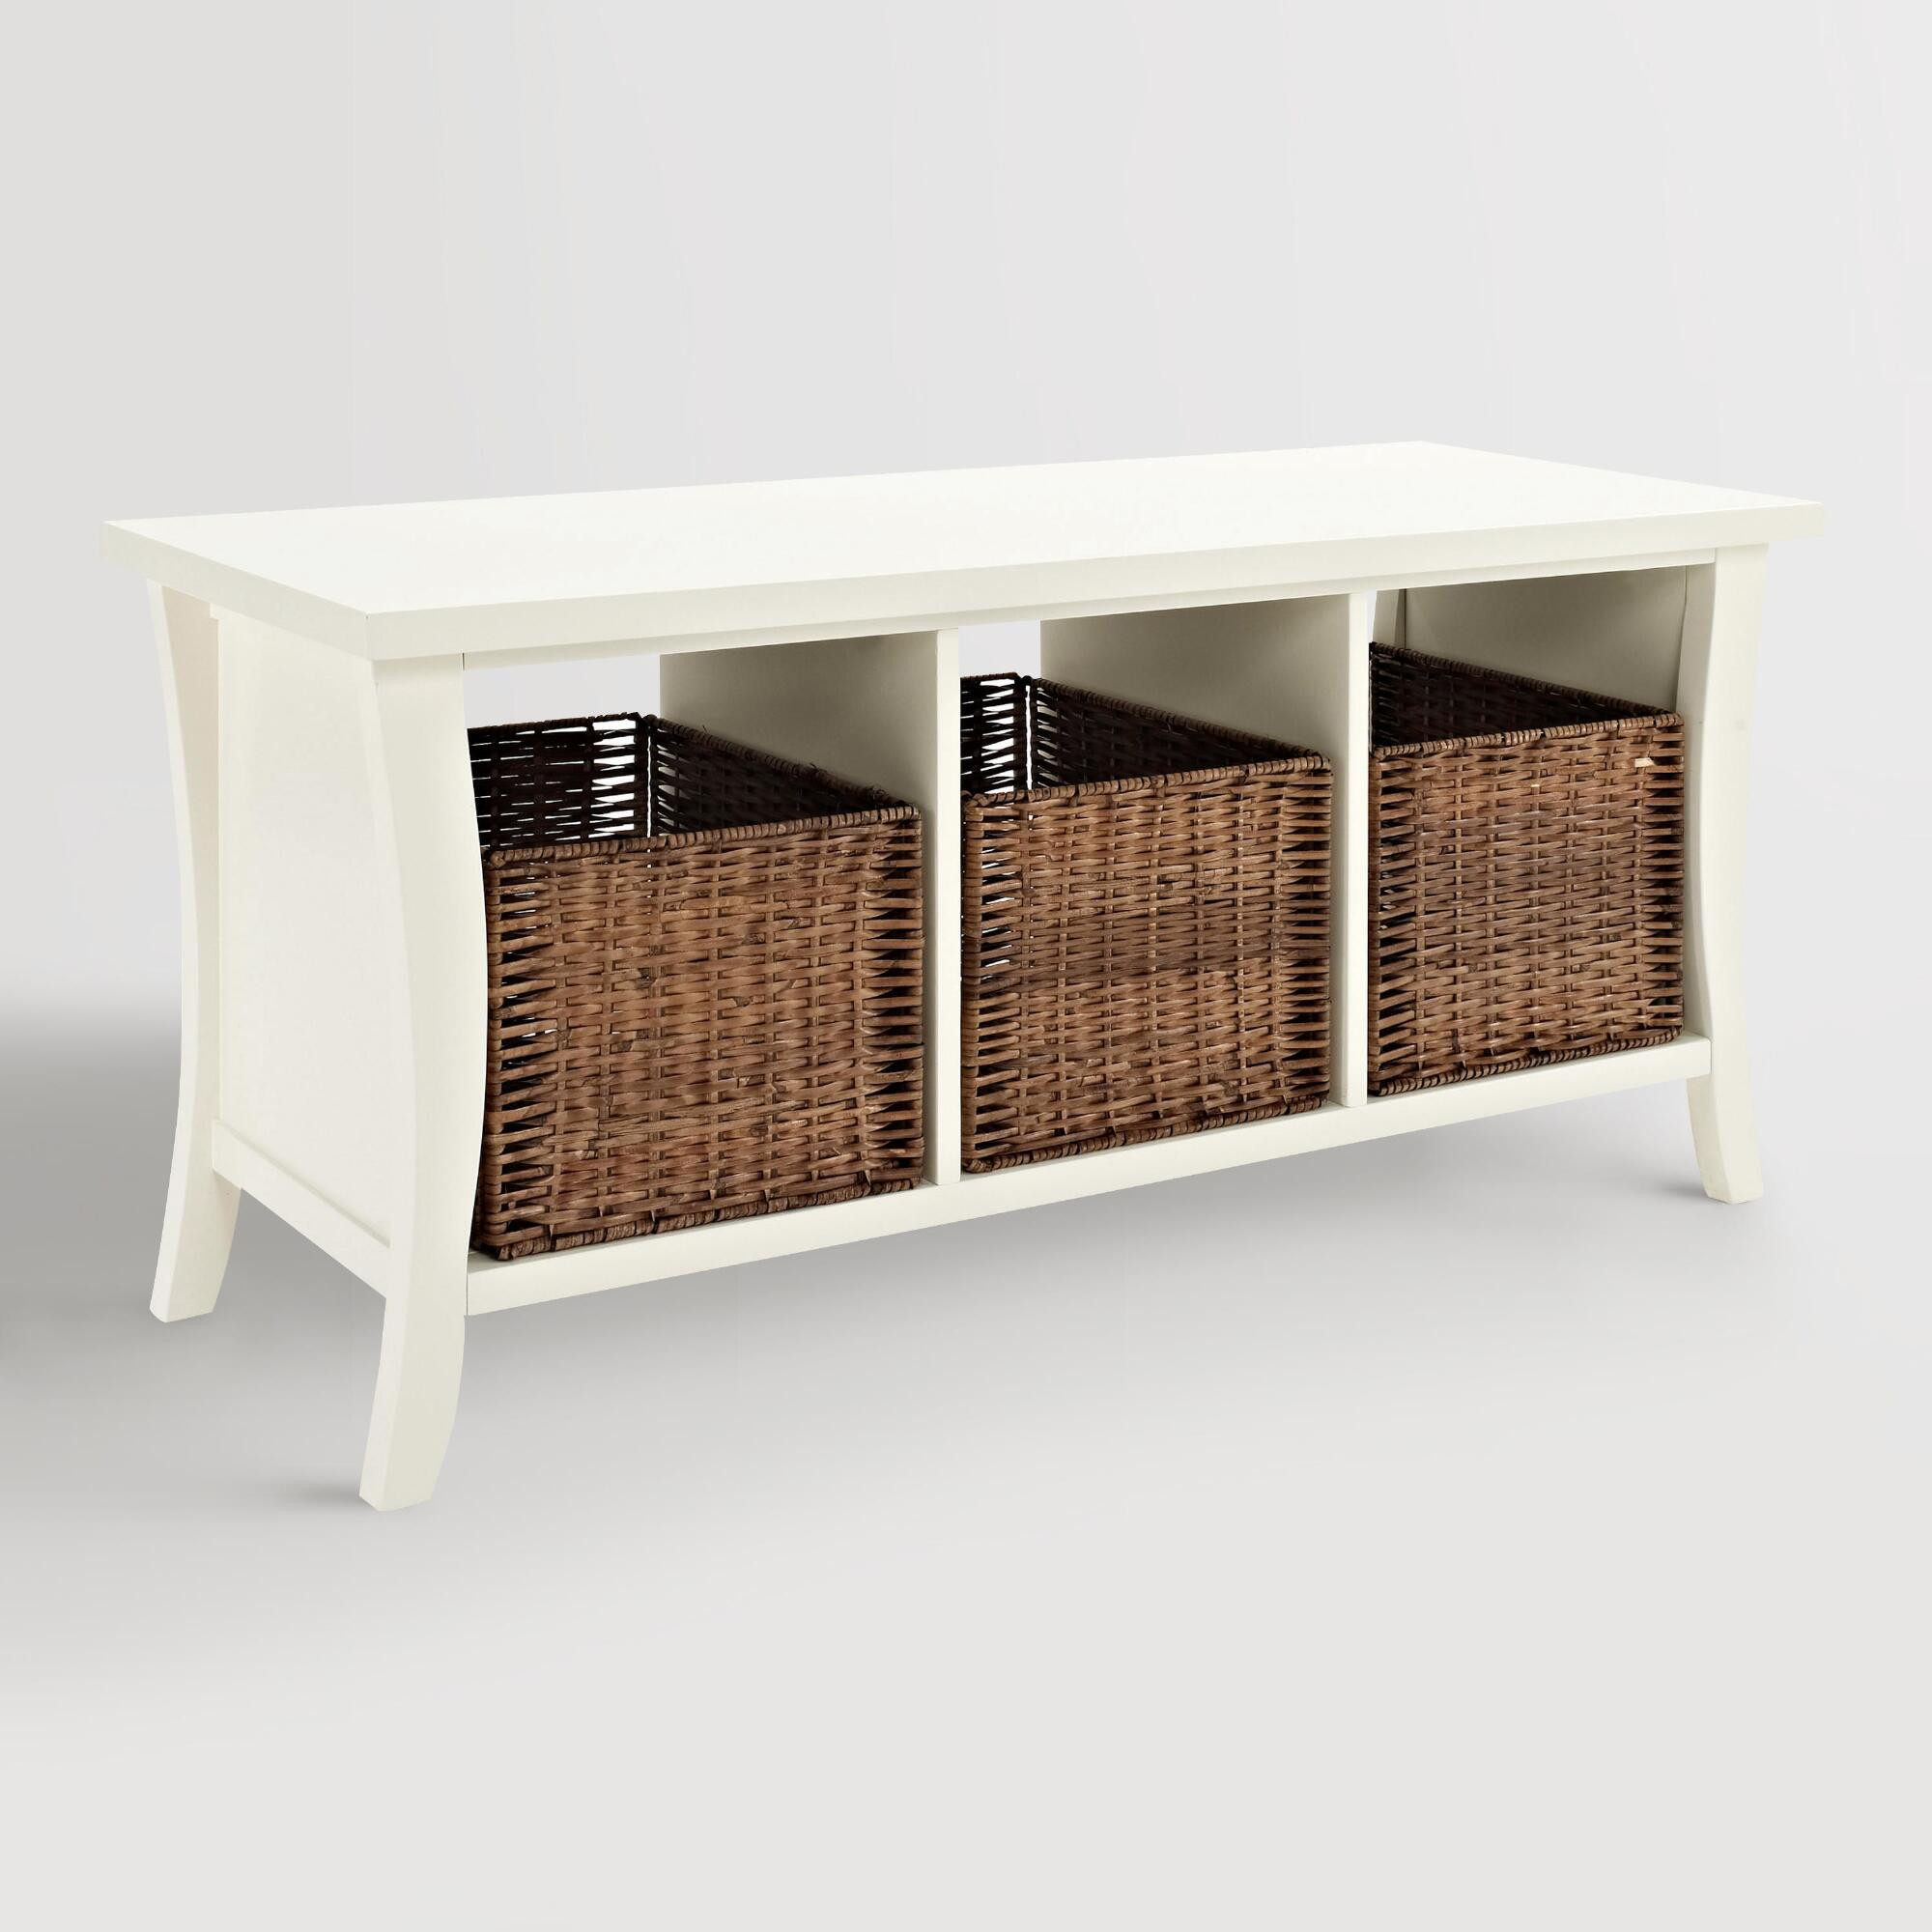 White Wooden Storage Bench
 White Wood Cassia Entryway Storage Bench with Baskets